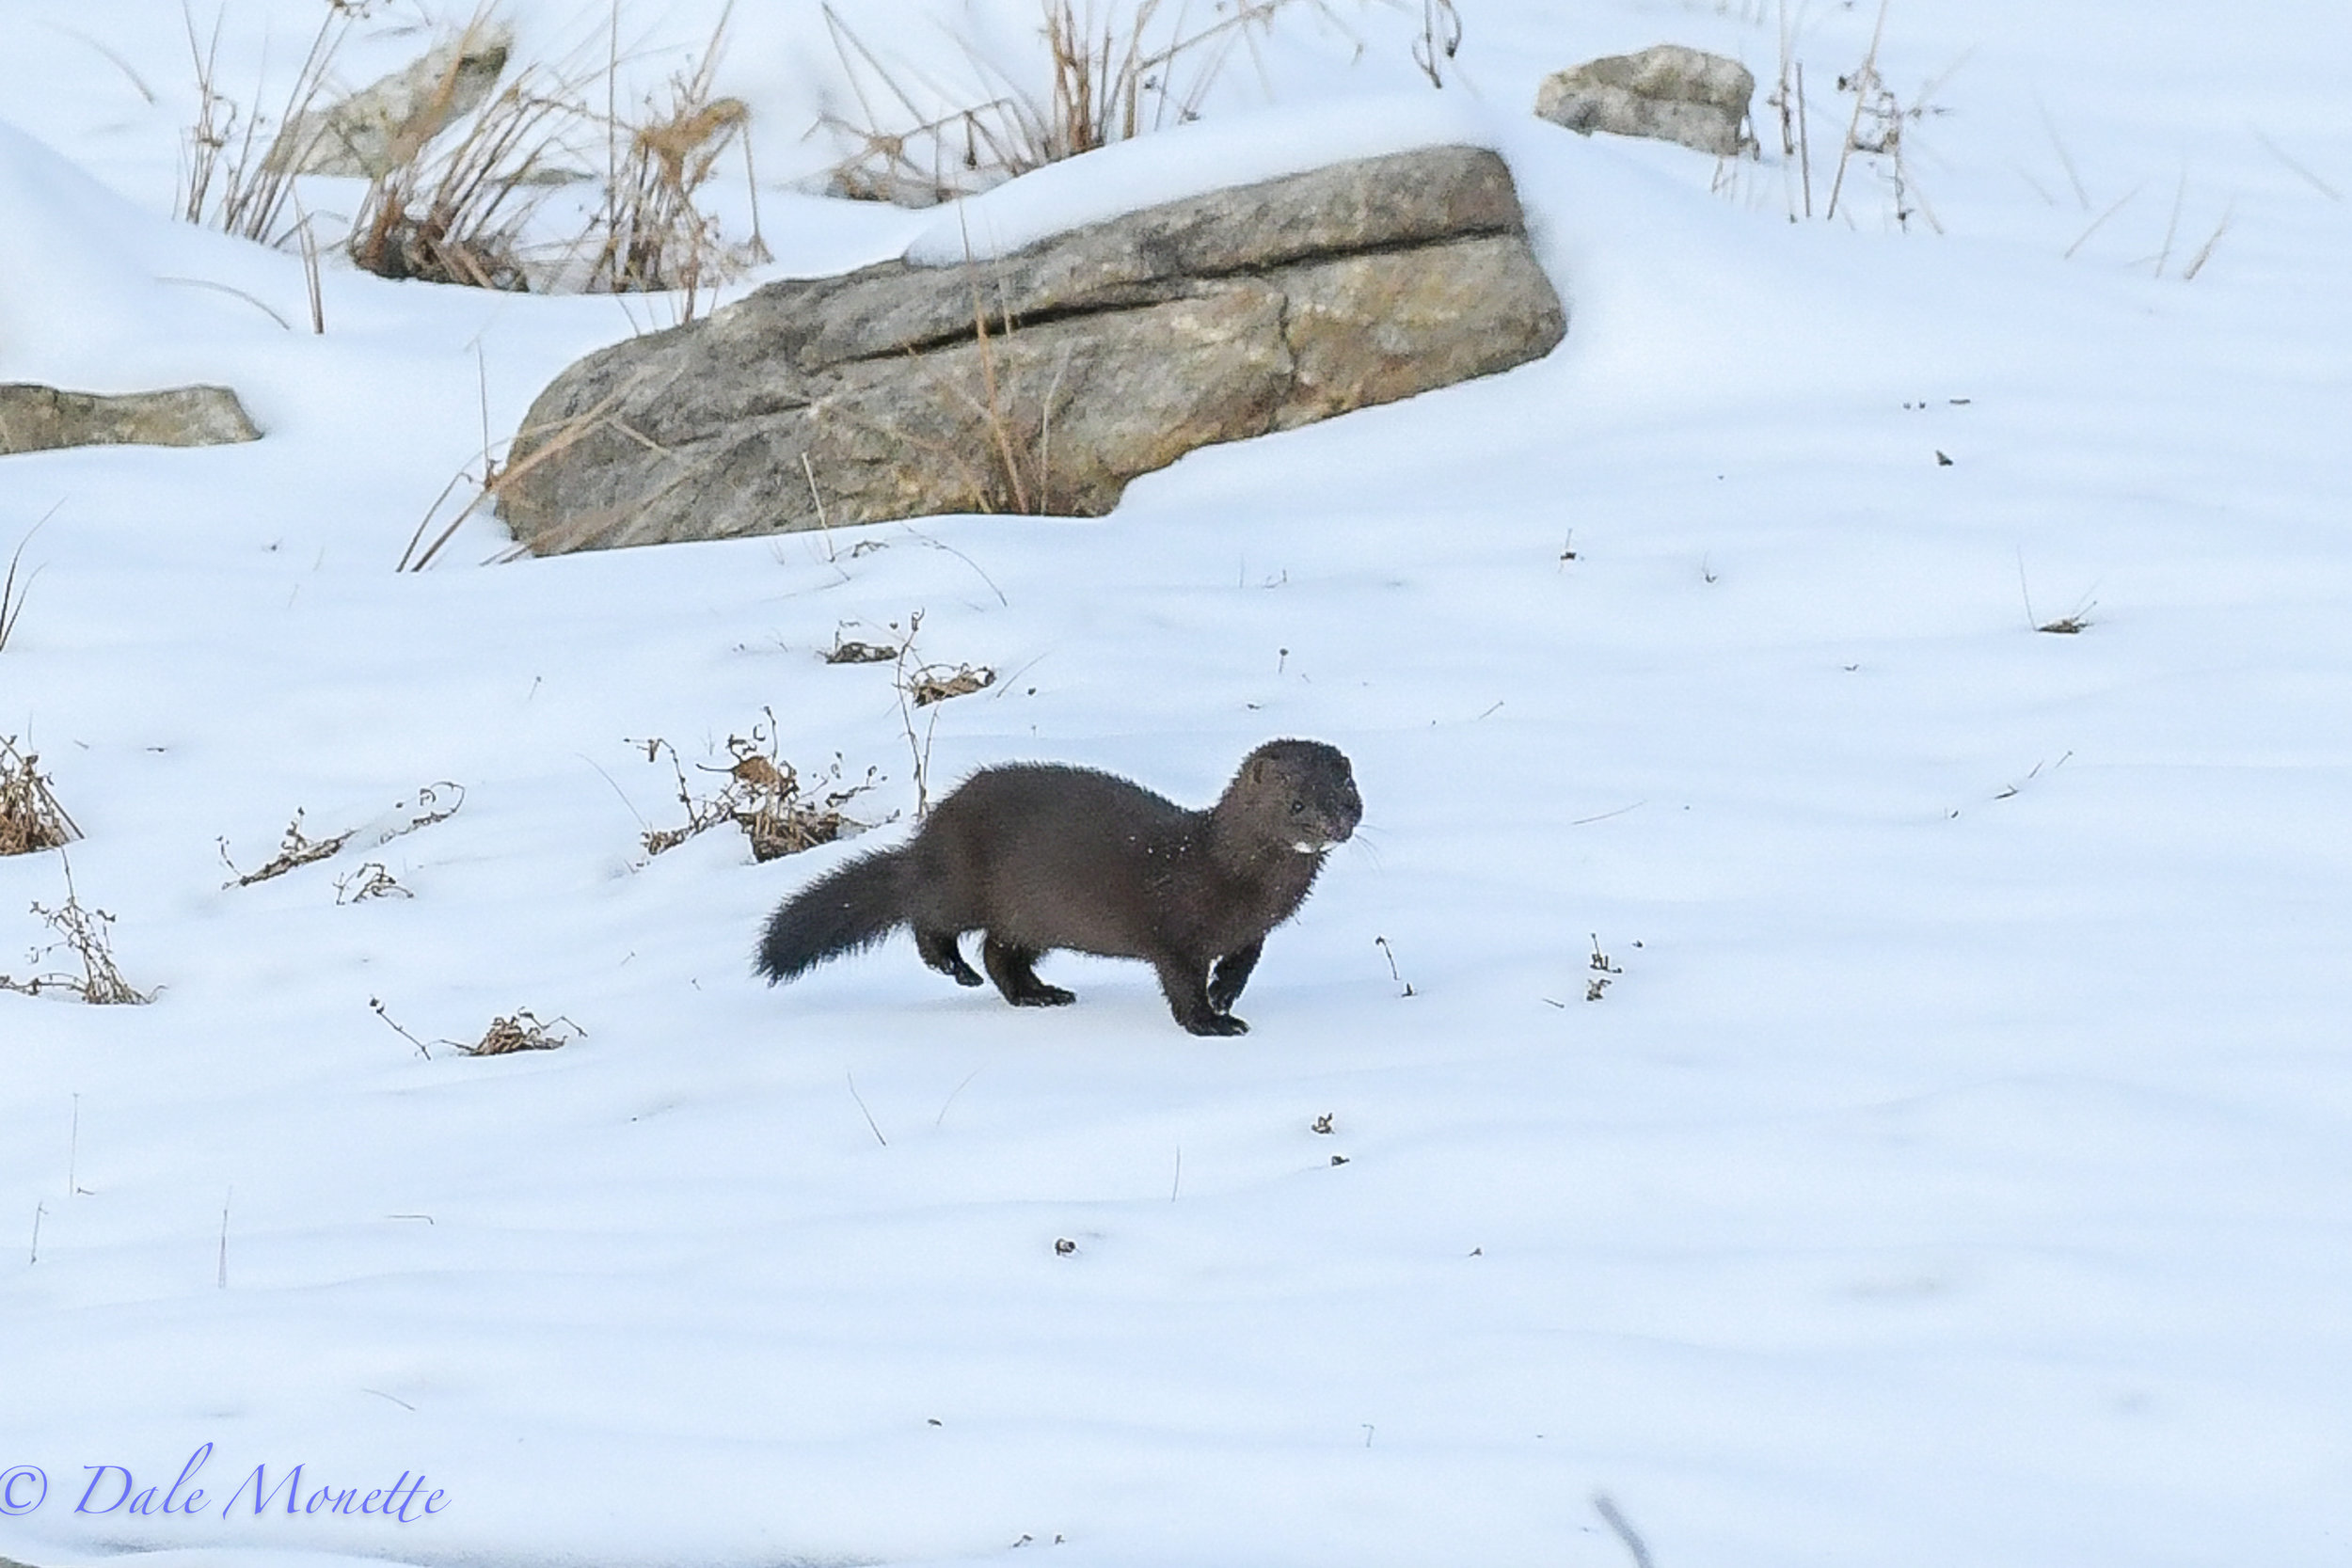   Here is another mink image.&nbsp; They sure are alert and fast creatures.....  